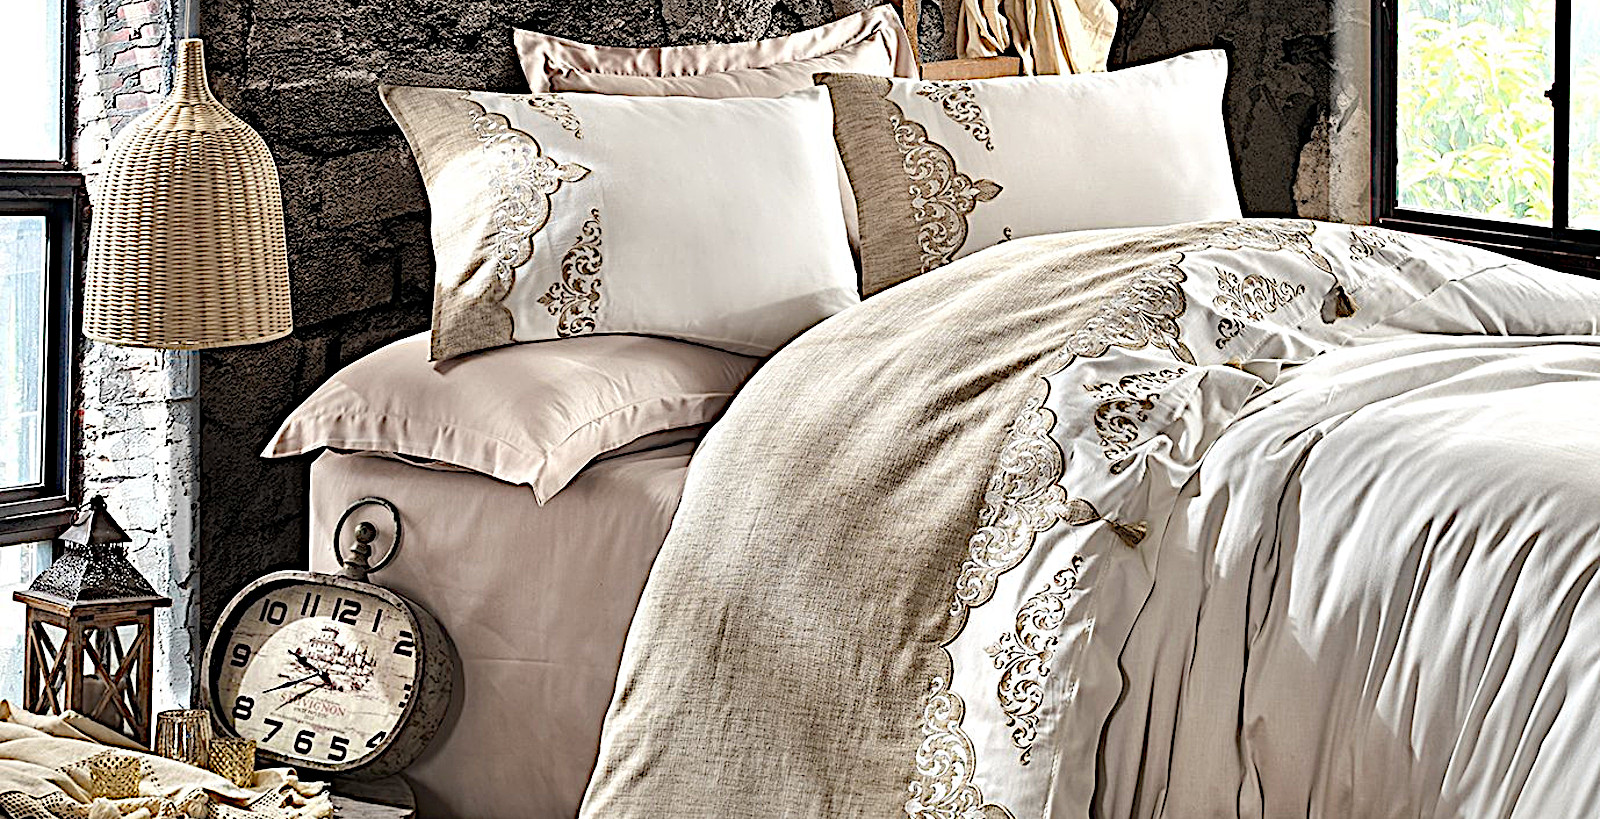 Low price lighting dining bedding collections